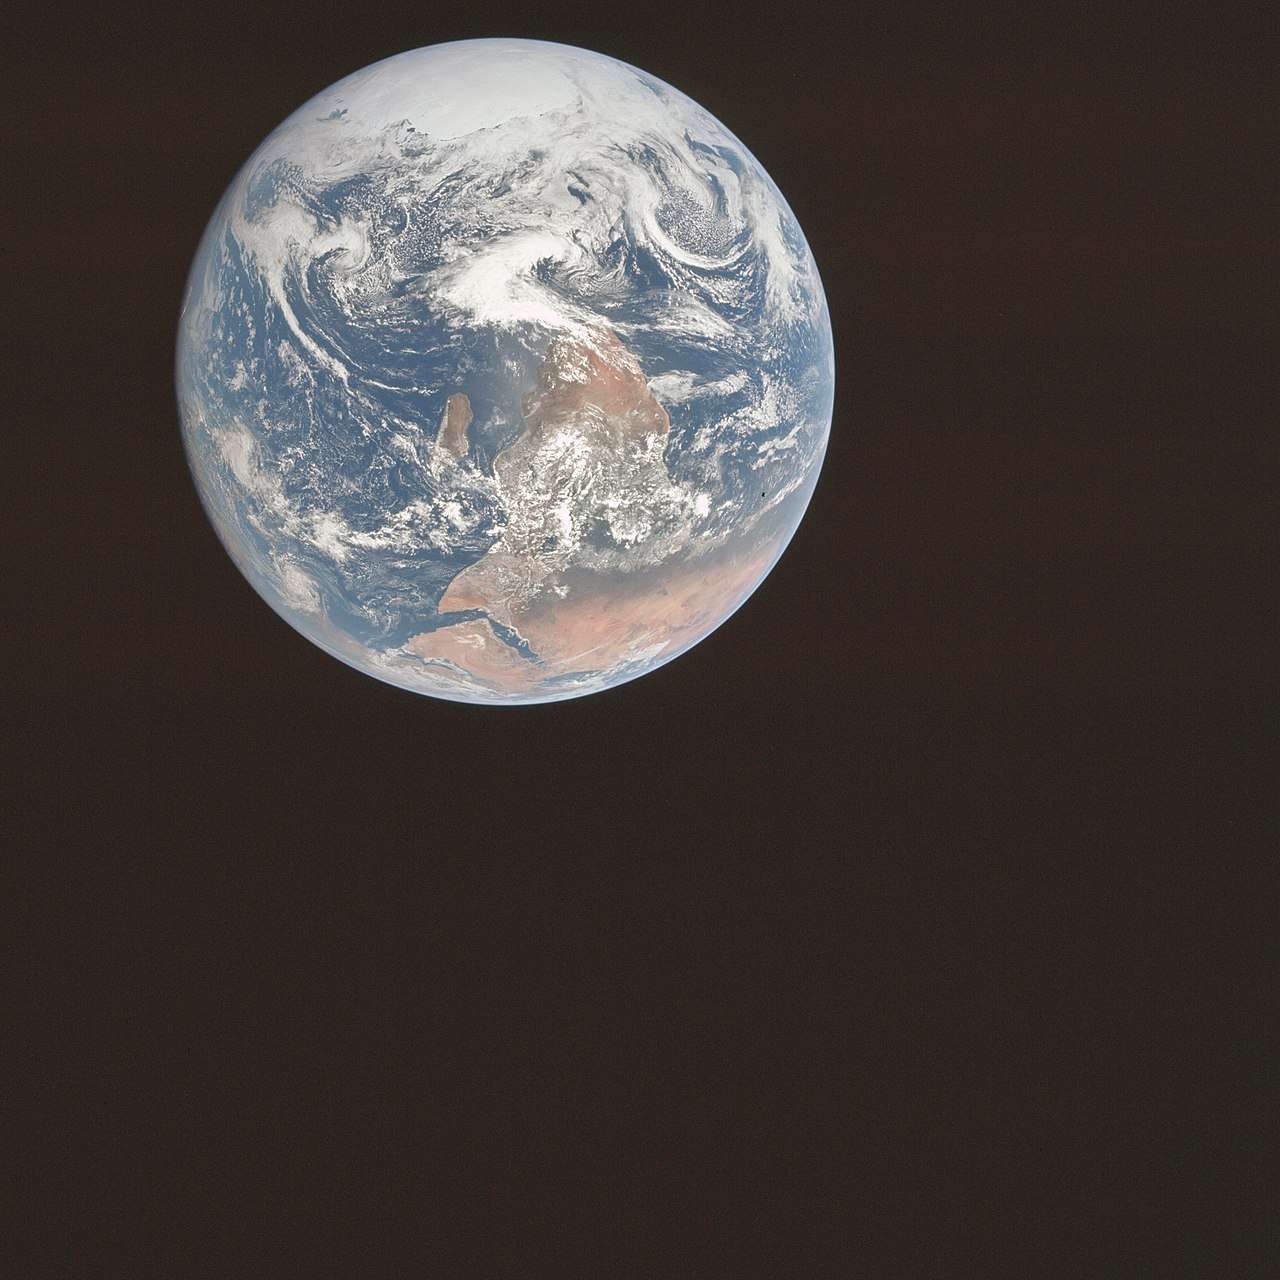 AS17-148-22727, from which The Blue Marble was cropped.